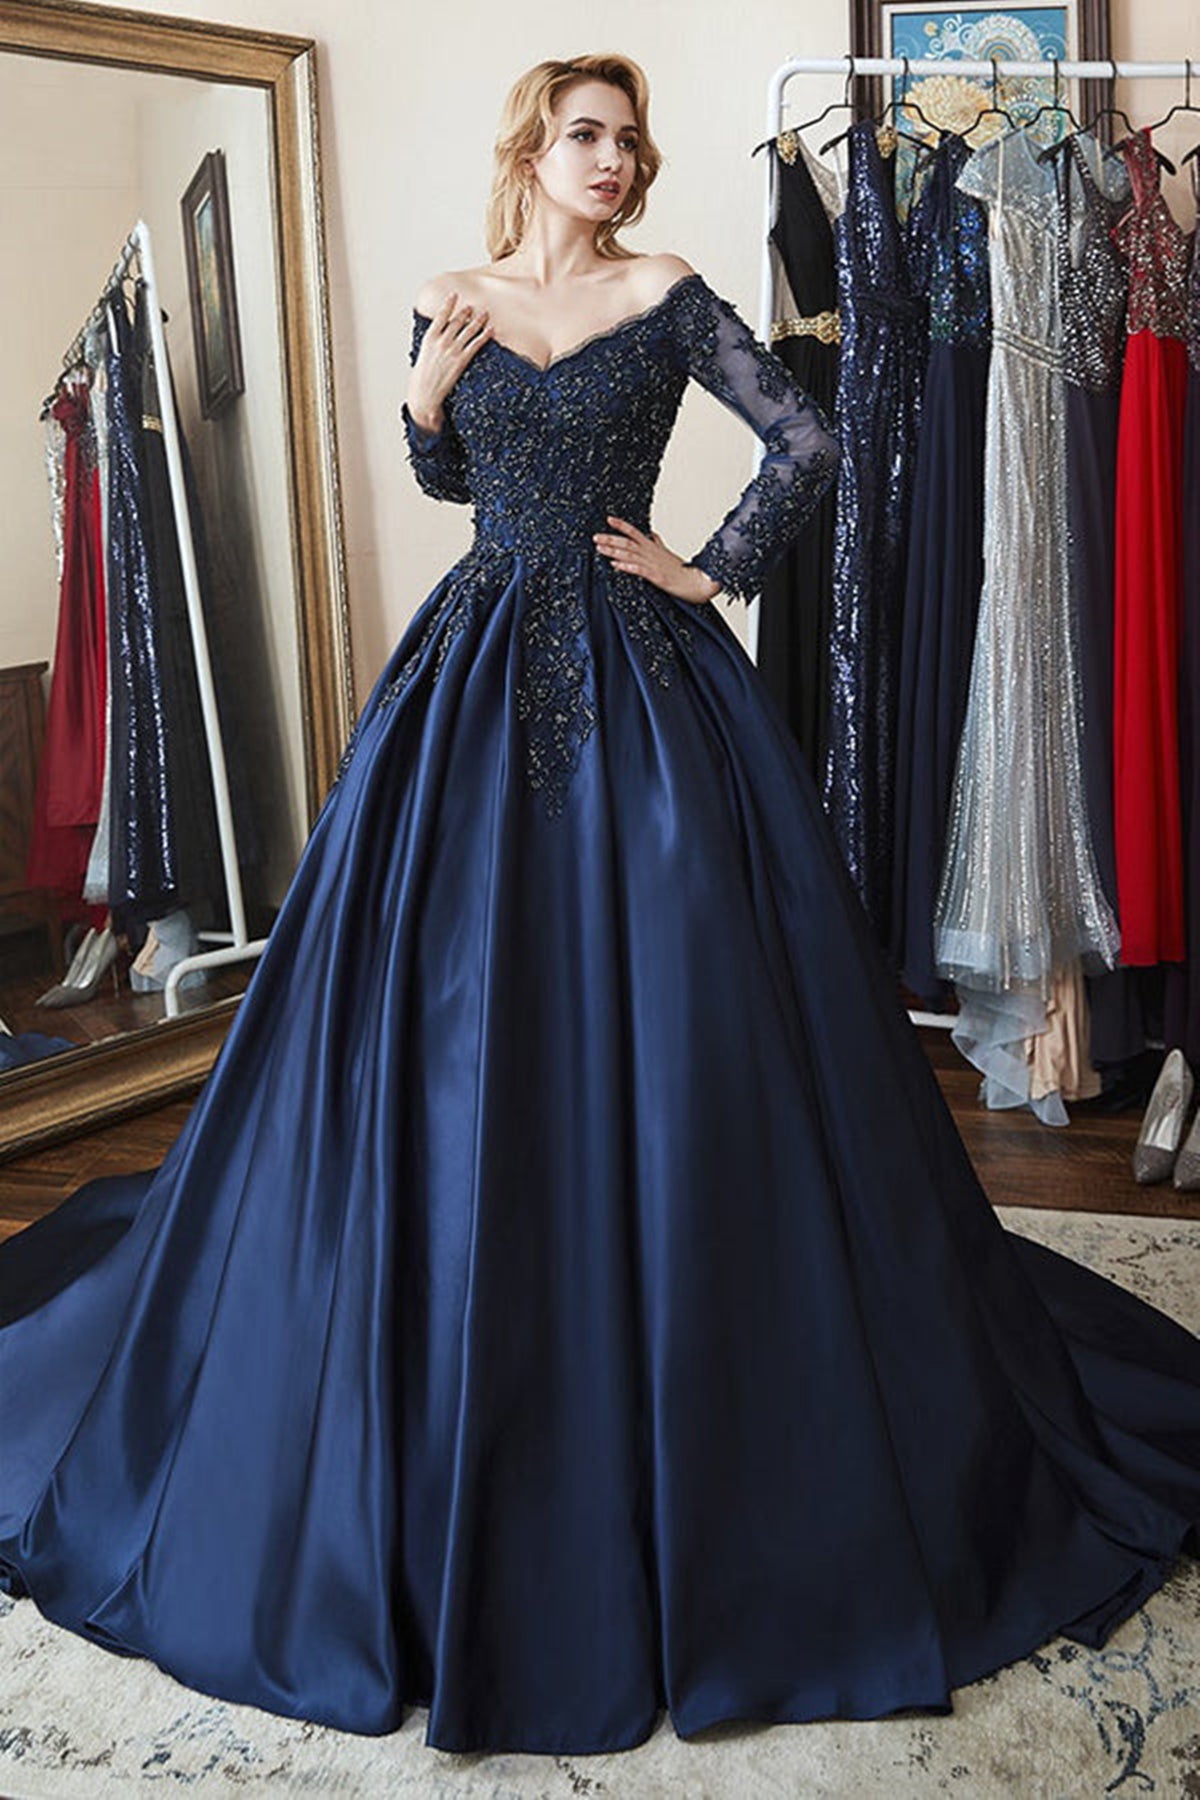 The Amber Gown -Dusty Blue | Lady Black Tie